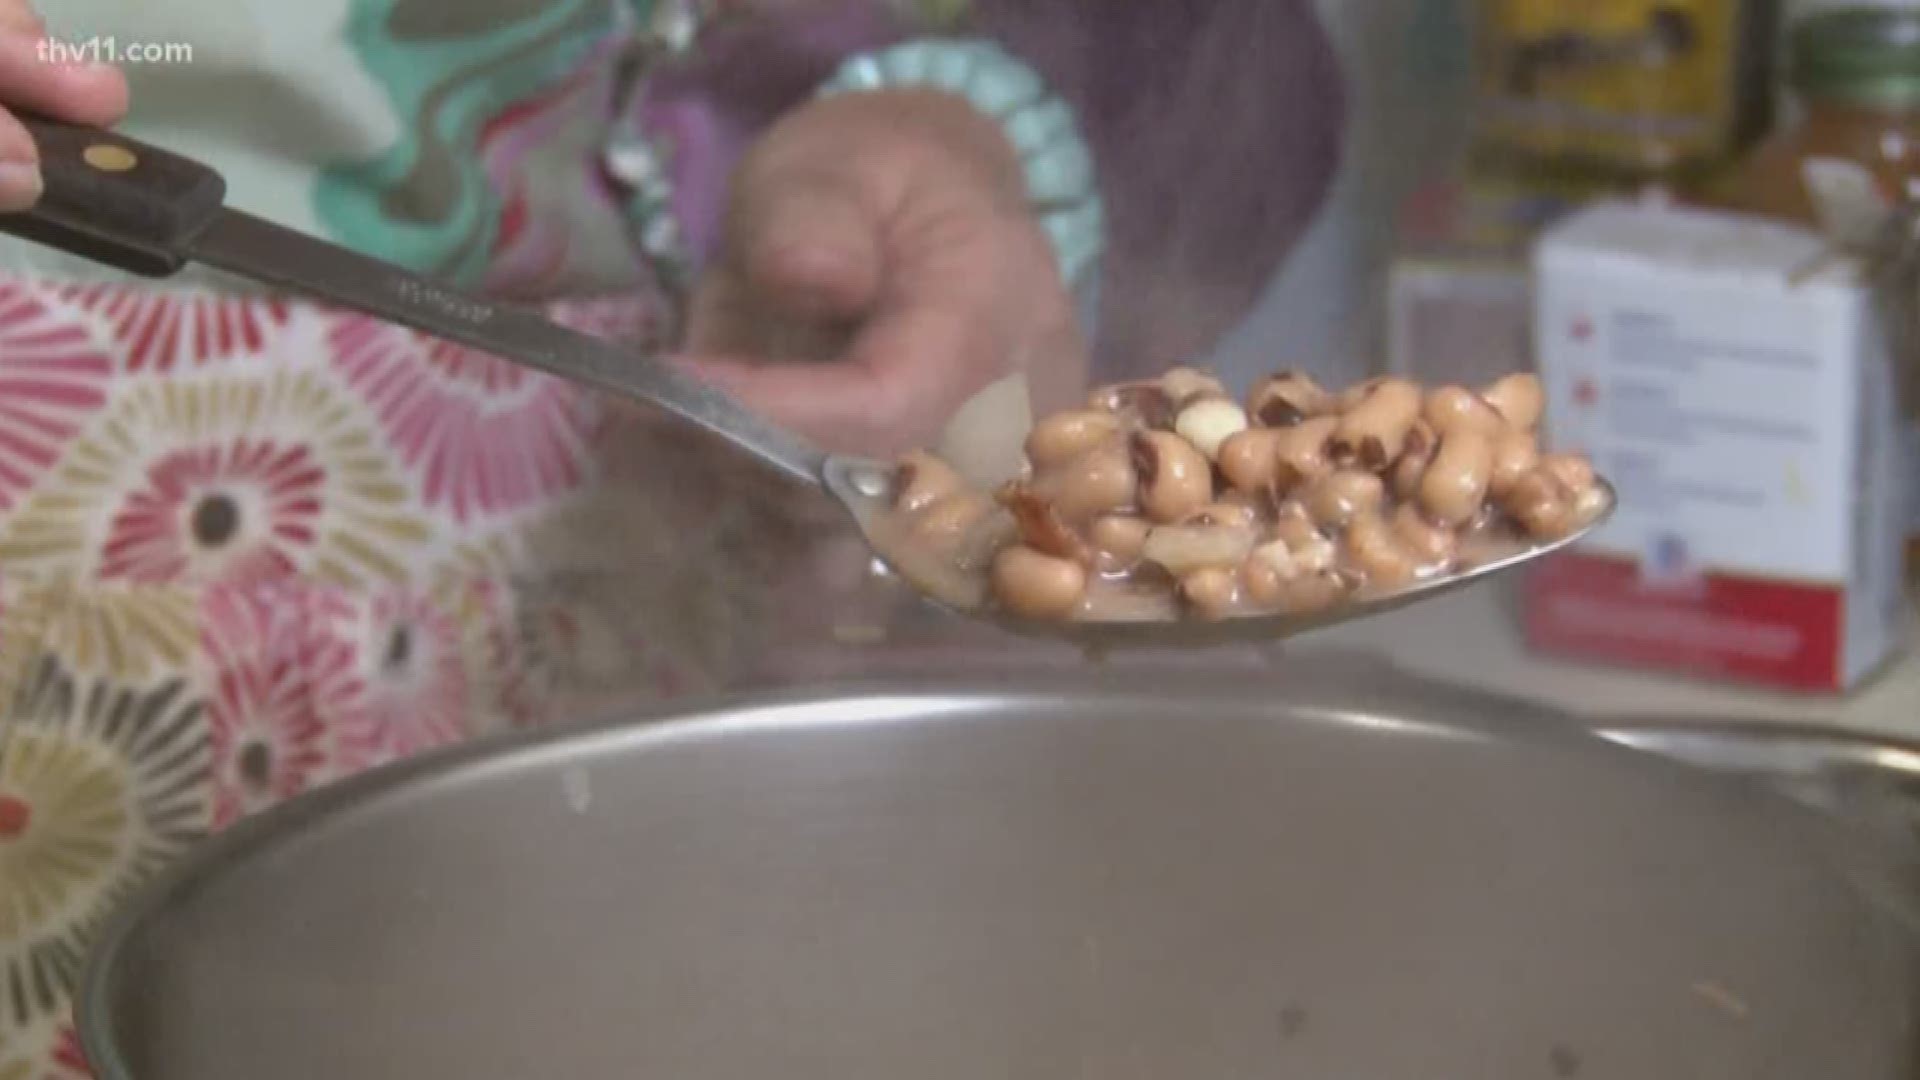 Does eating black-eyes peas bring good luck on New Year's Day?